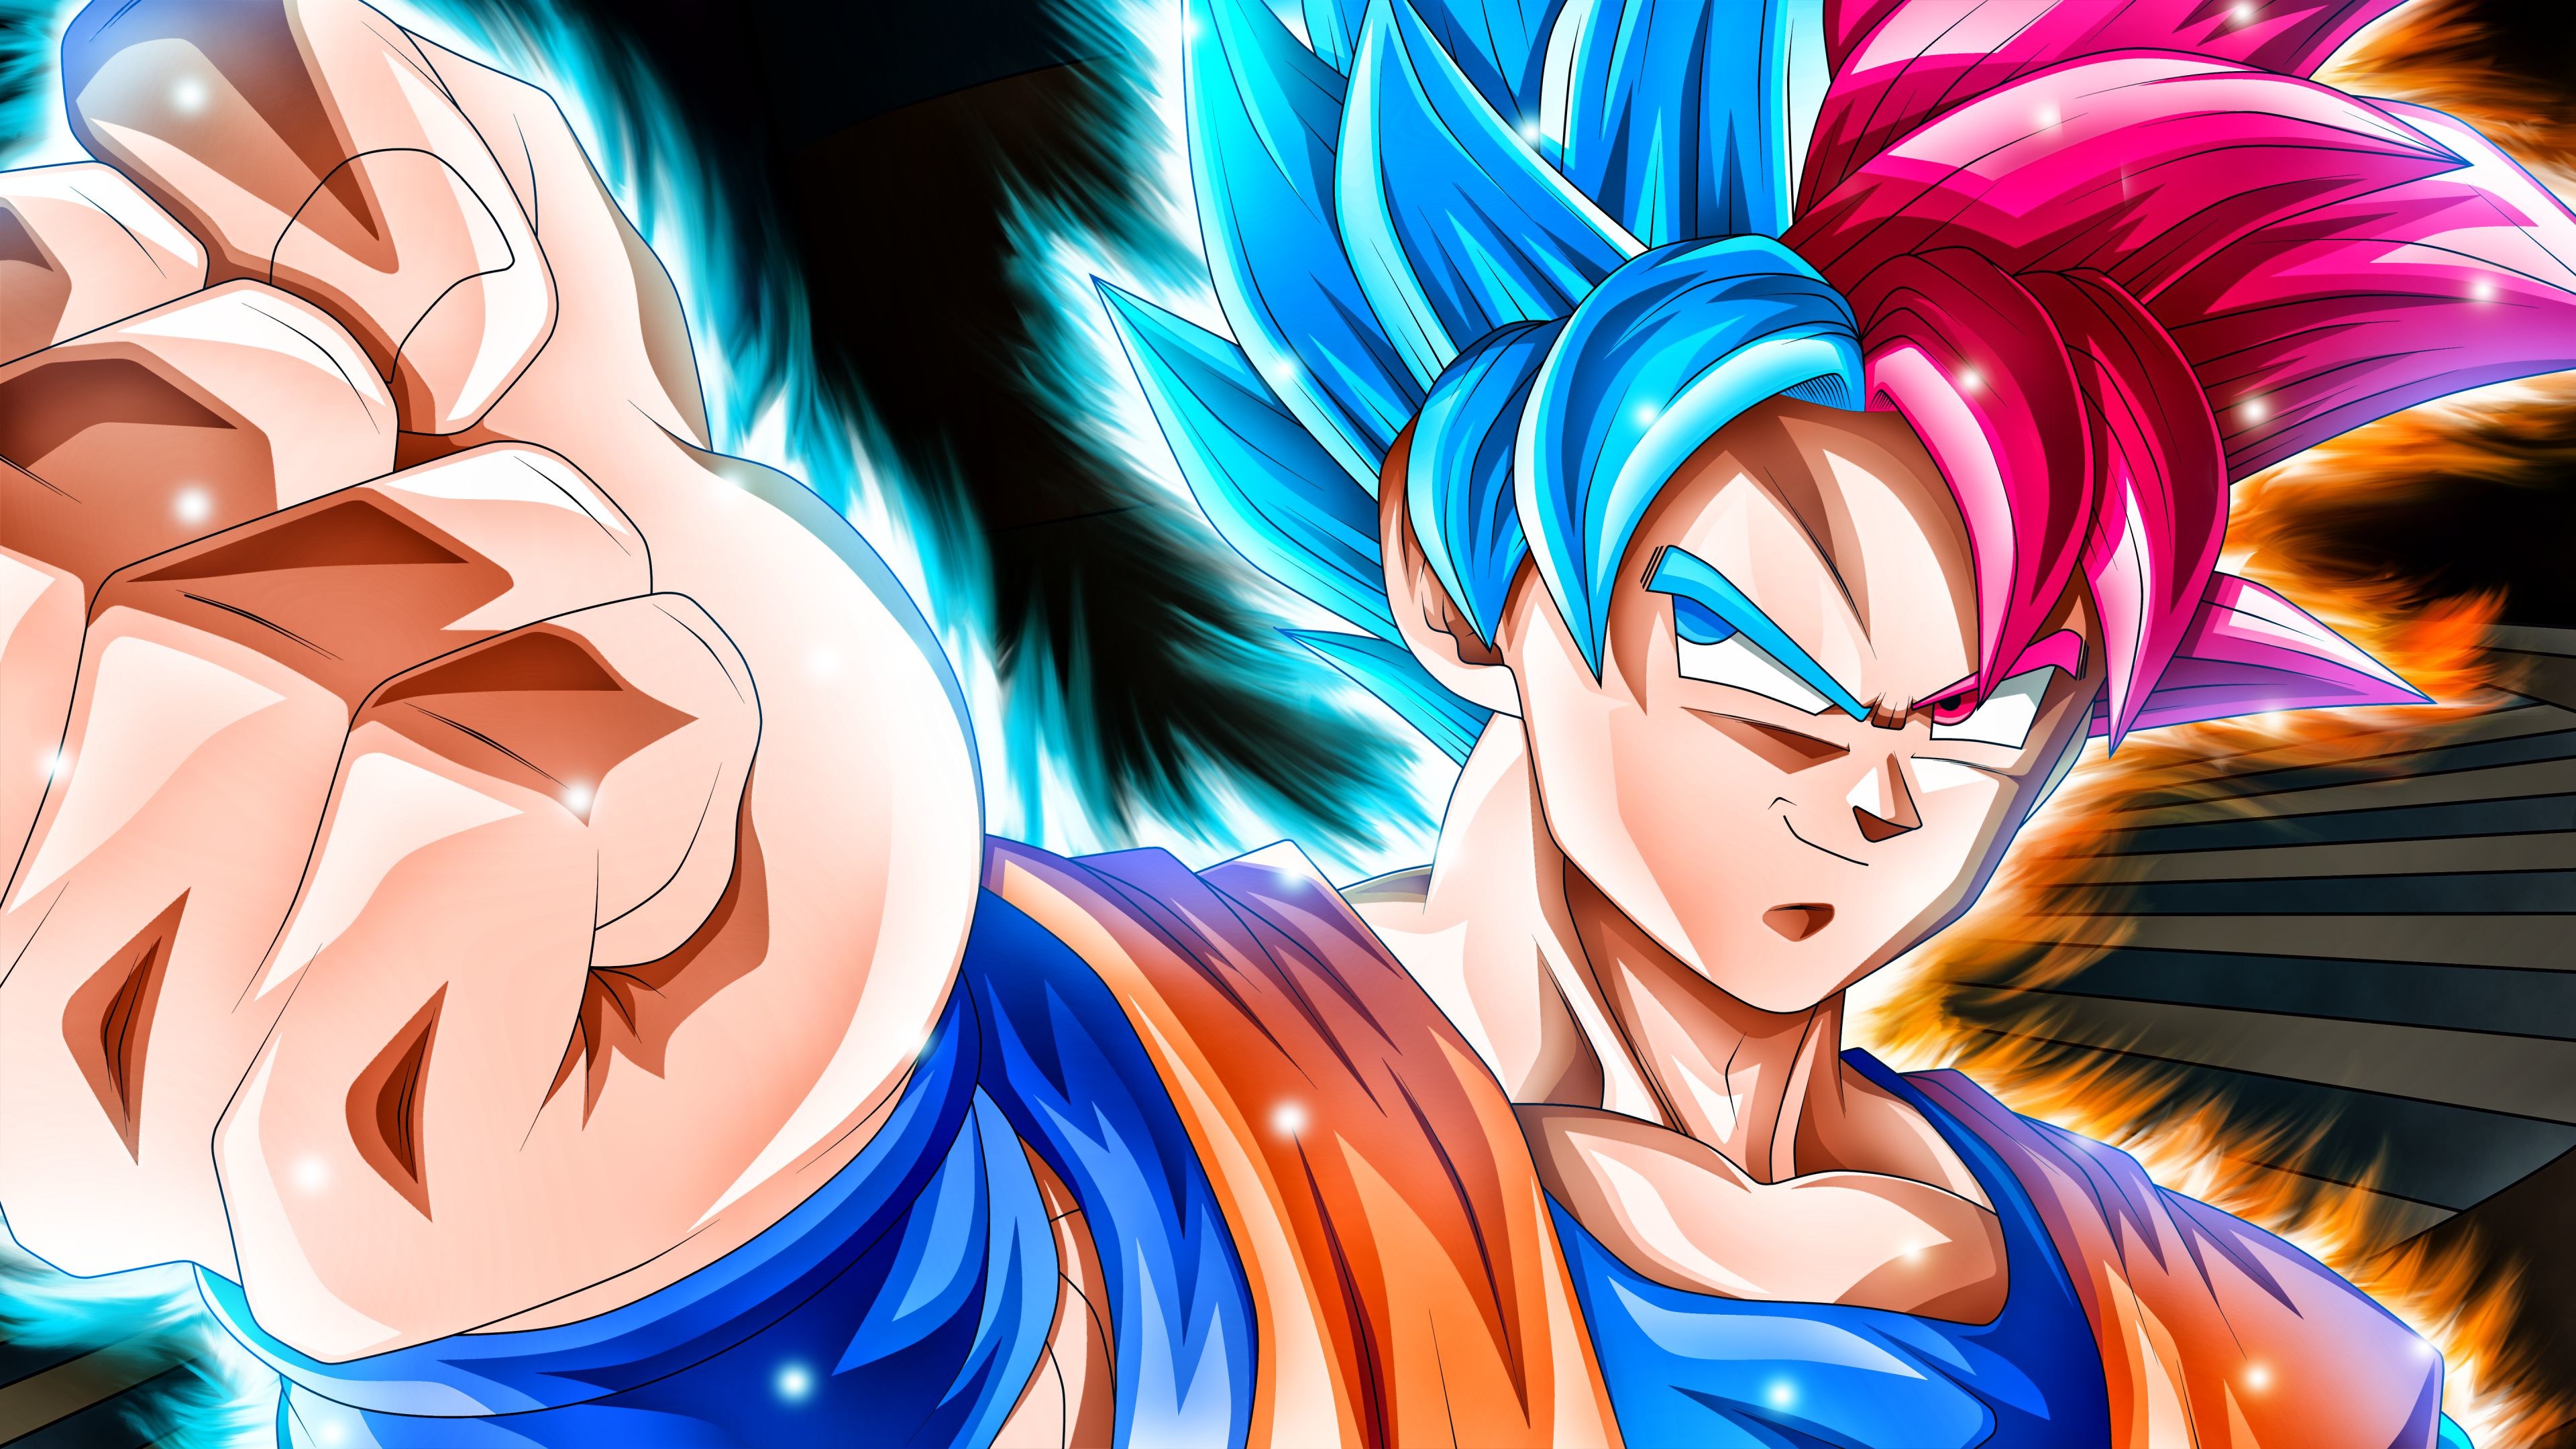 mxnrooster101GFX on X FREE DBS BROLY SSB GOKU PFP Yall wanna slide  some likes and retweets they do be appreciated  And come join the server  if you havent httpstcozXTyWDYfeC GFX DBZ 